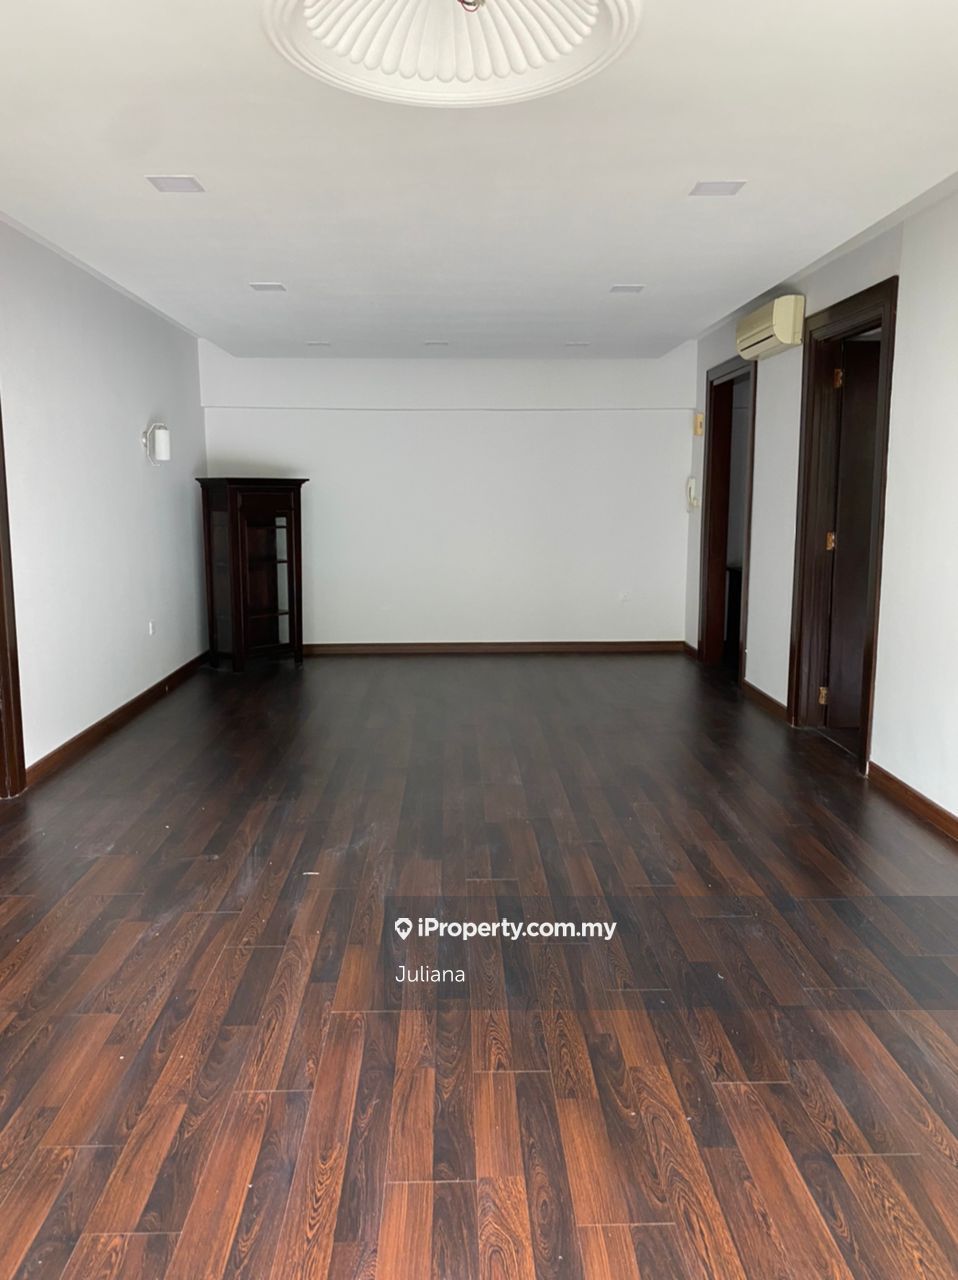 Perdana View Boutique Serviced Residence 4+1 bedrooms for sale in ...